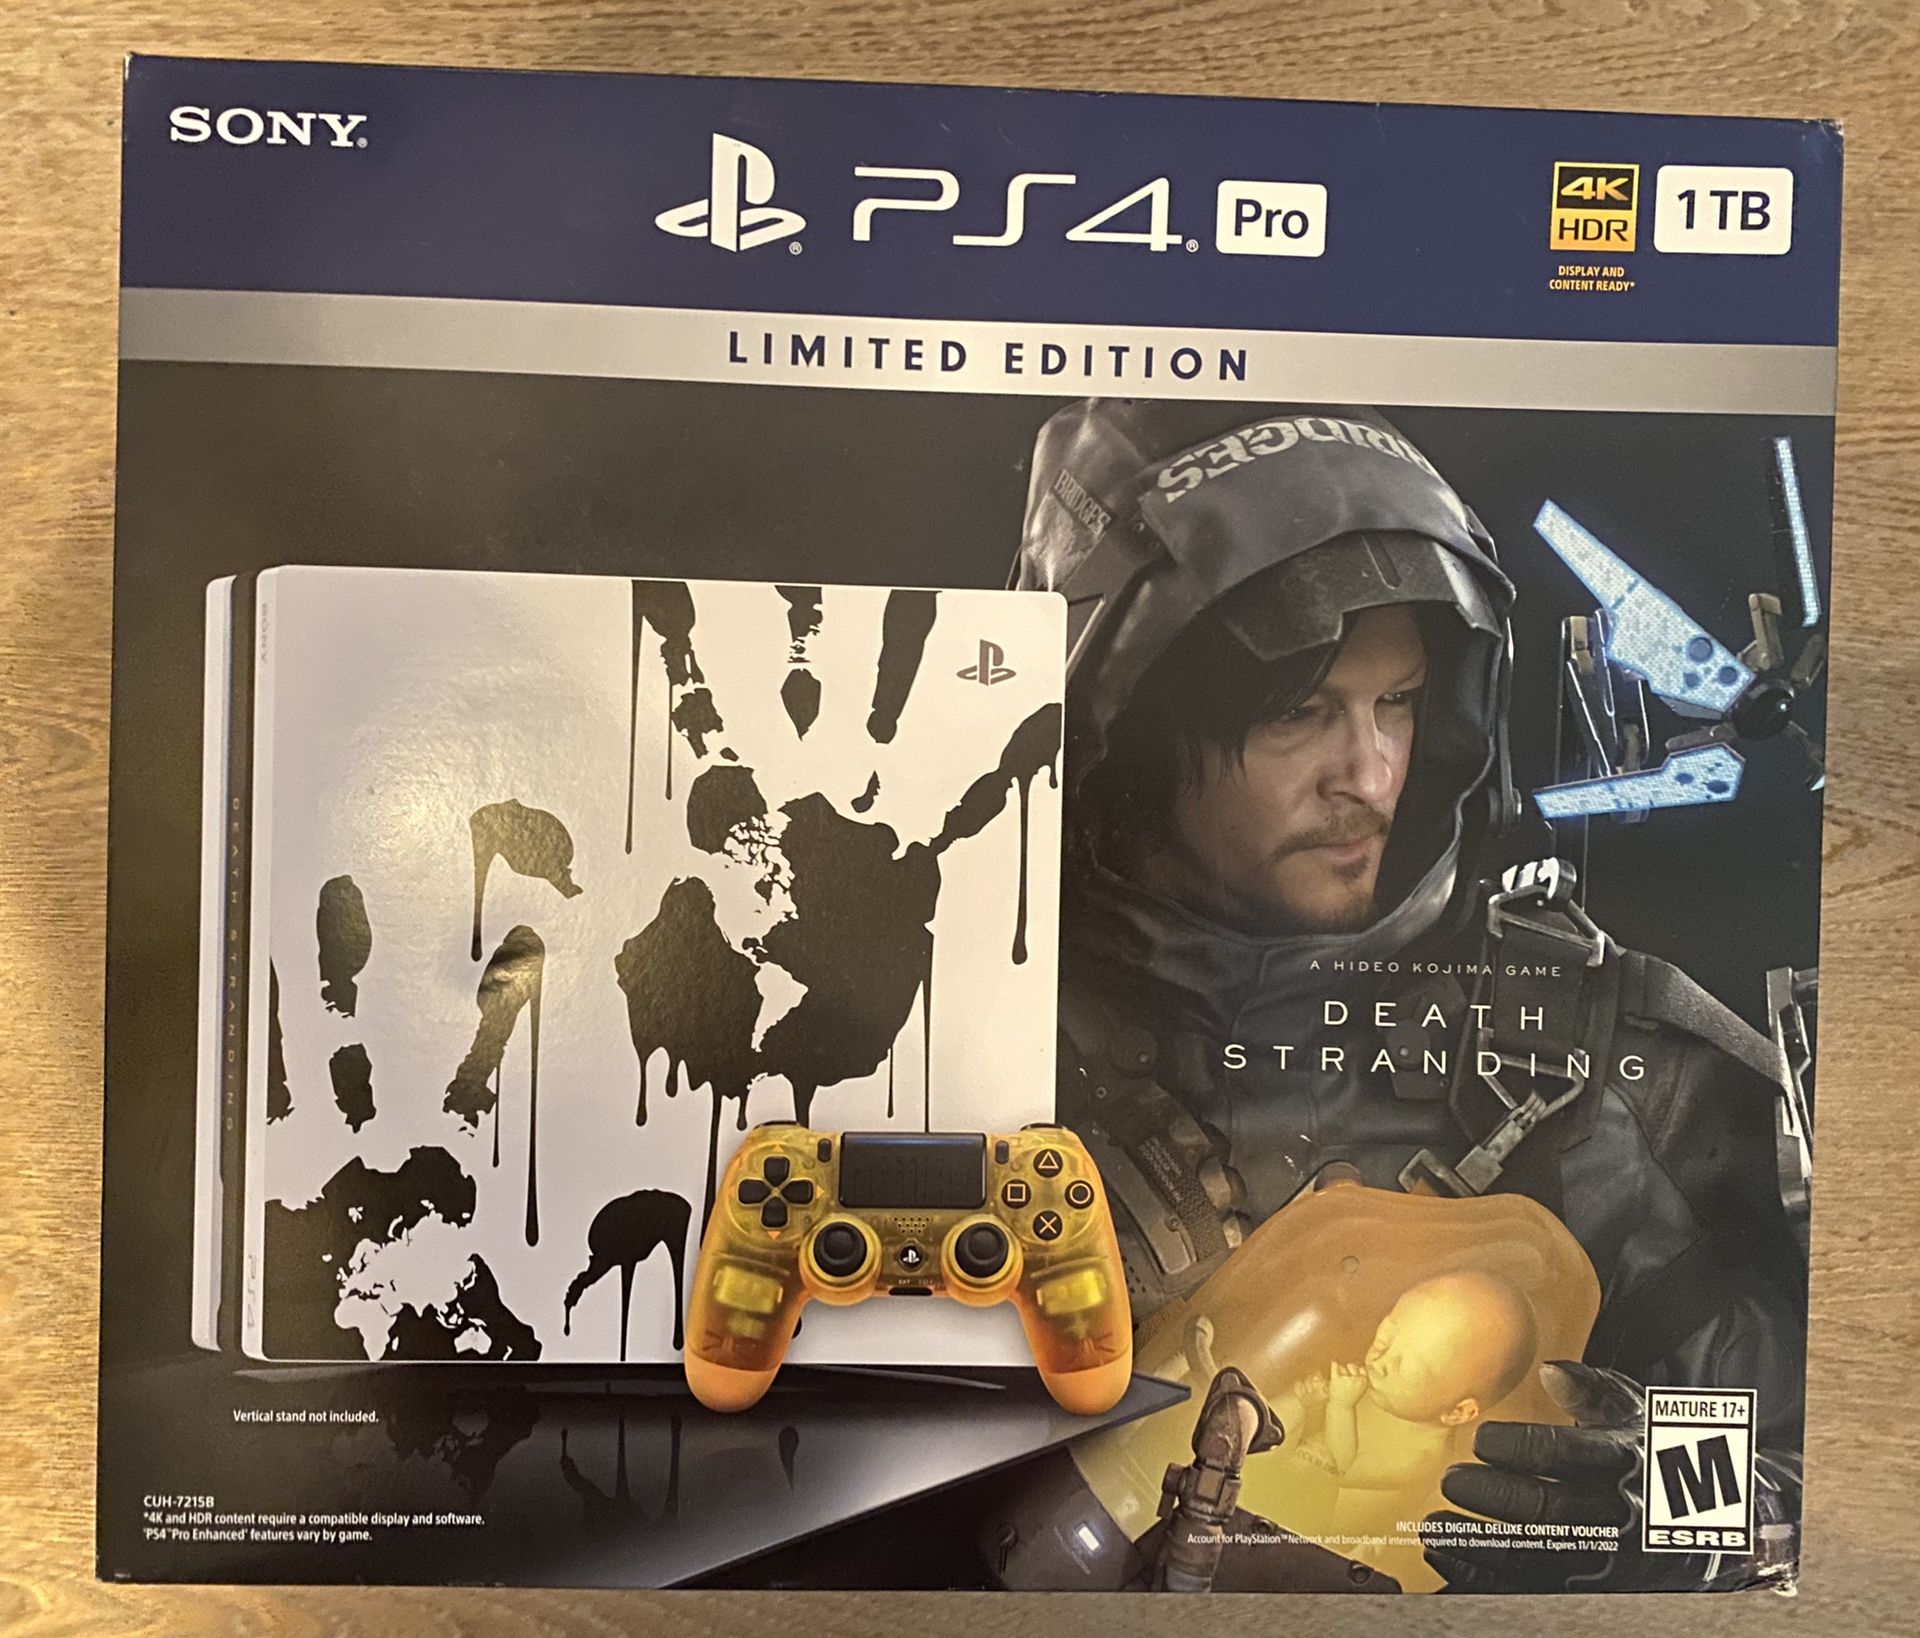 Ps4 Pro DEATH STRANDING Edition Console and controller